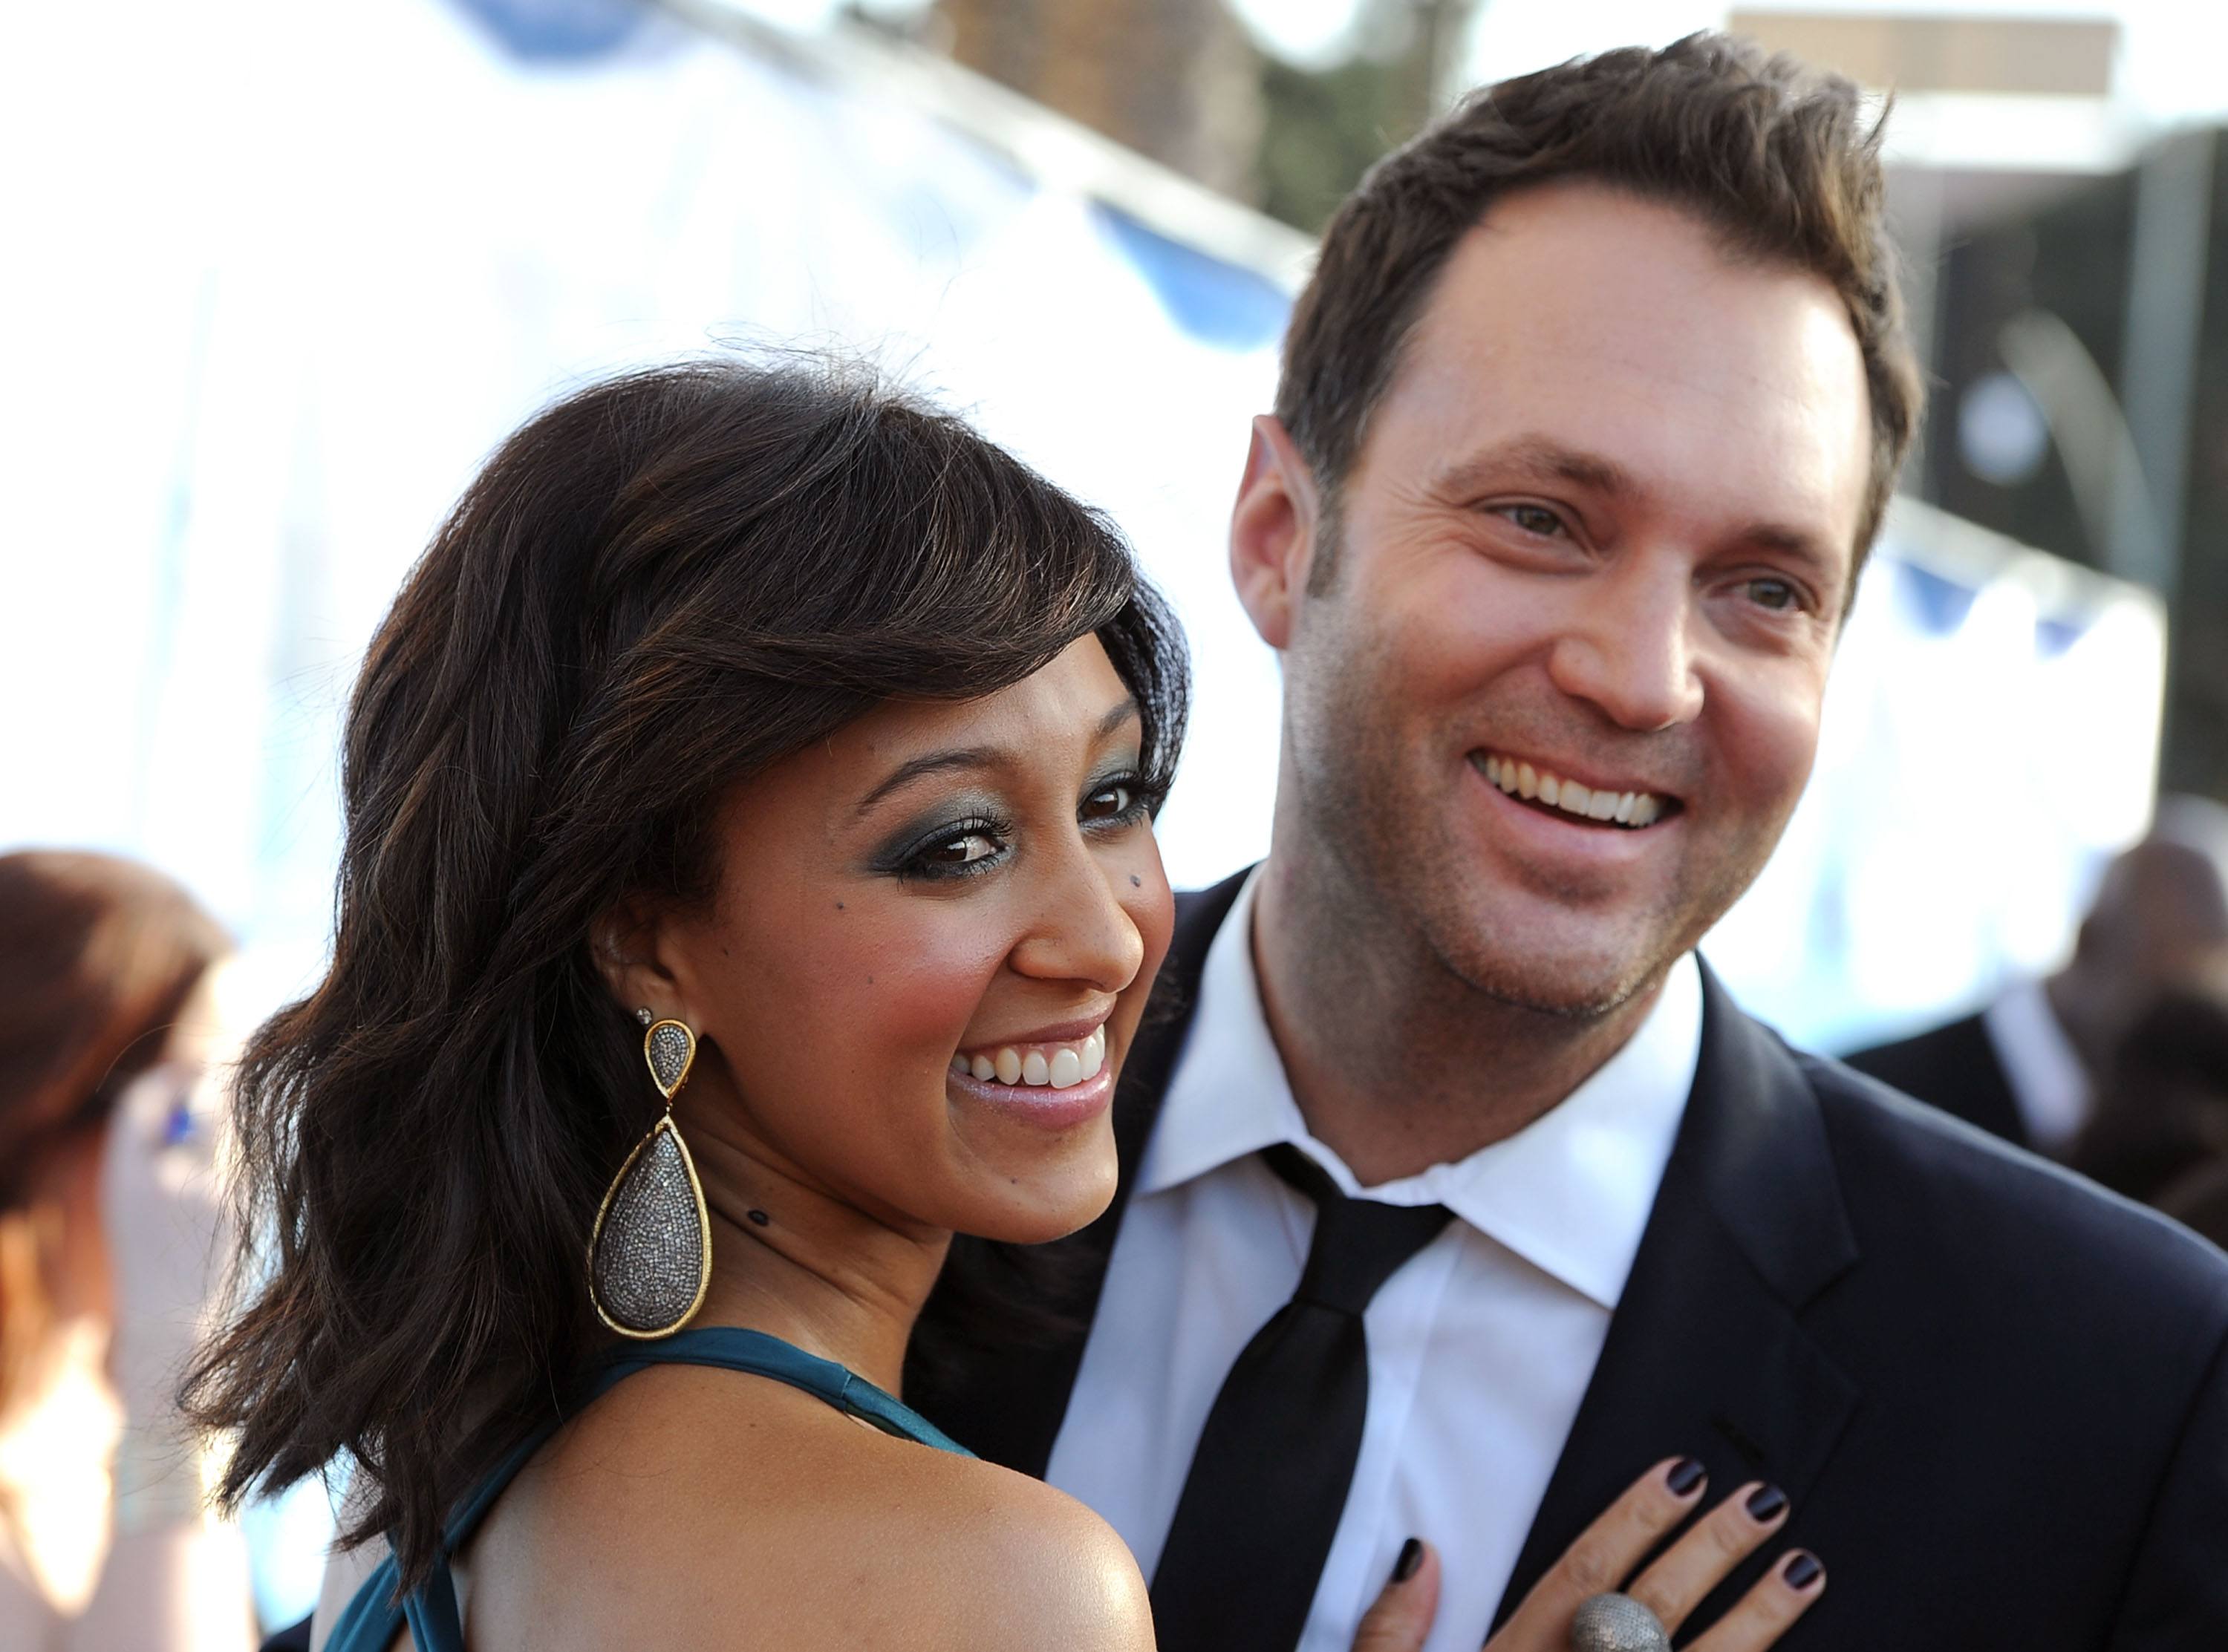 Actress Tamera Mowry and reporter Adam Housley arrive at the 42nd NAACP Image Awards held at The Shrine Auditorium on March 4, 2011 in Los Angeles, California. 